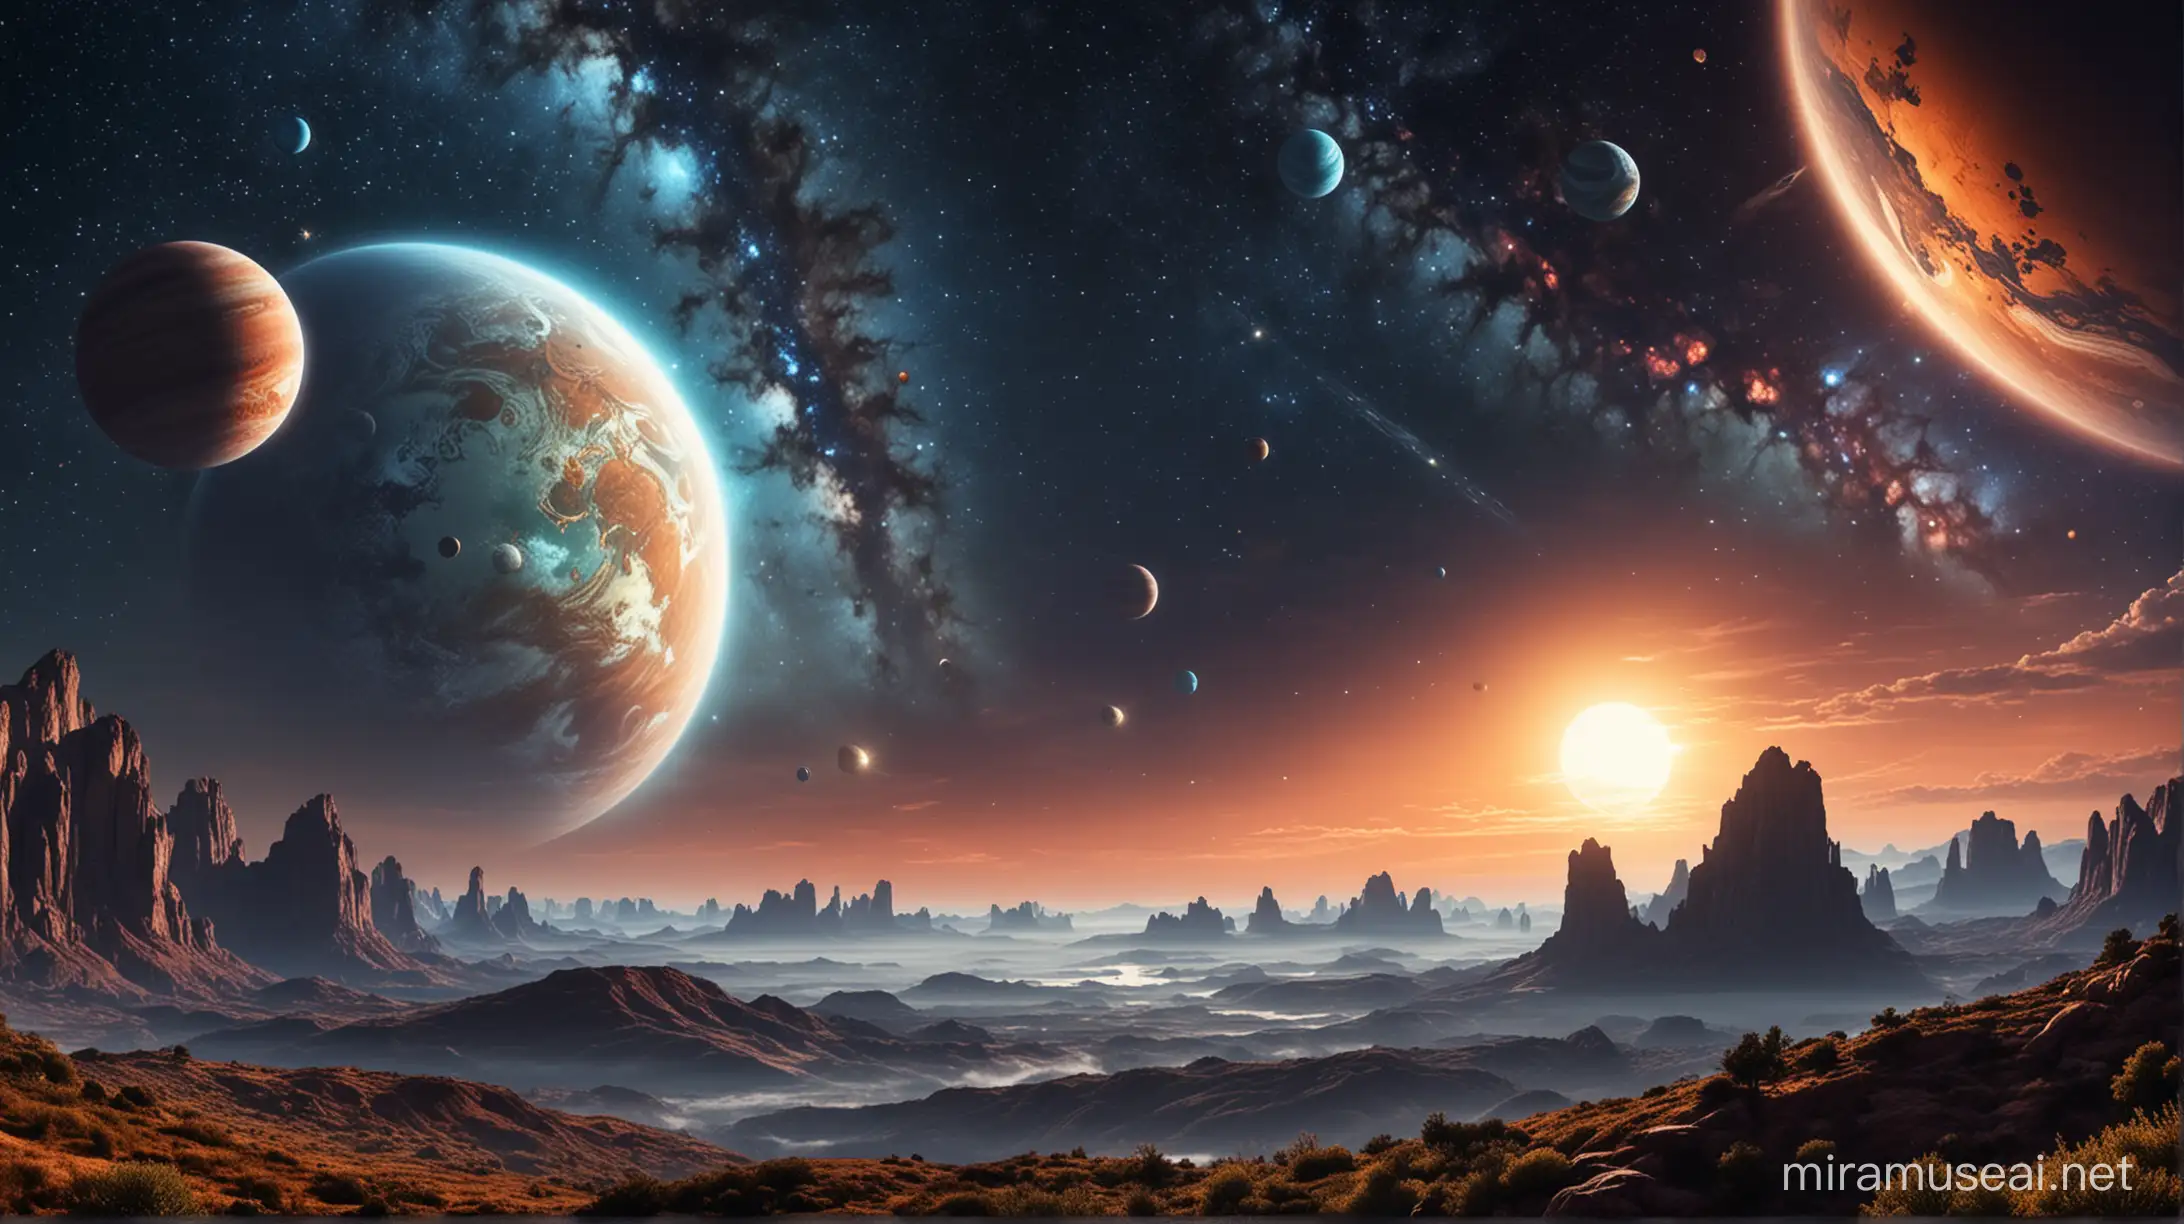 Cosmic Landscape with Planets in the Sky